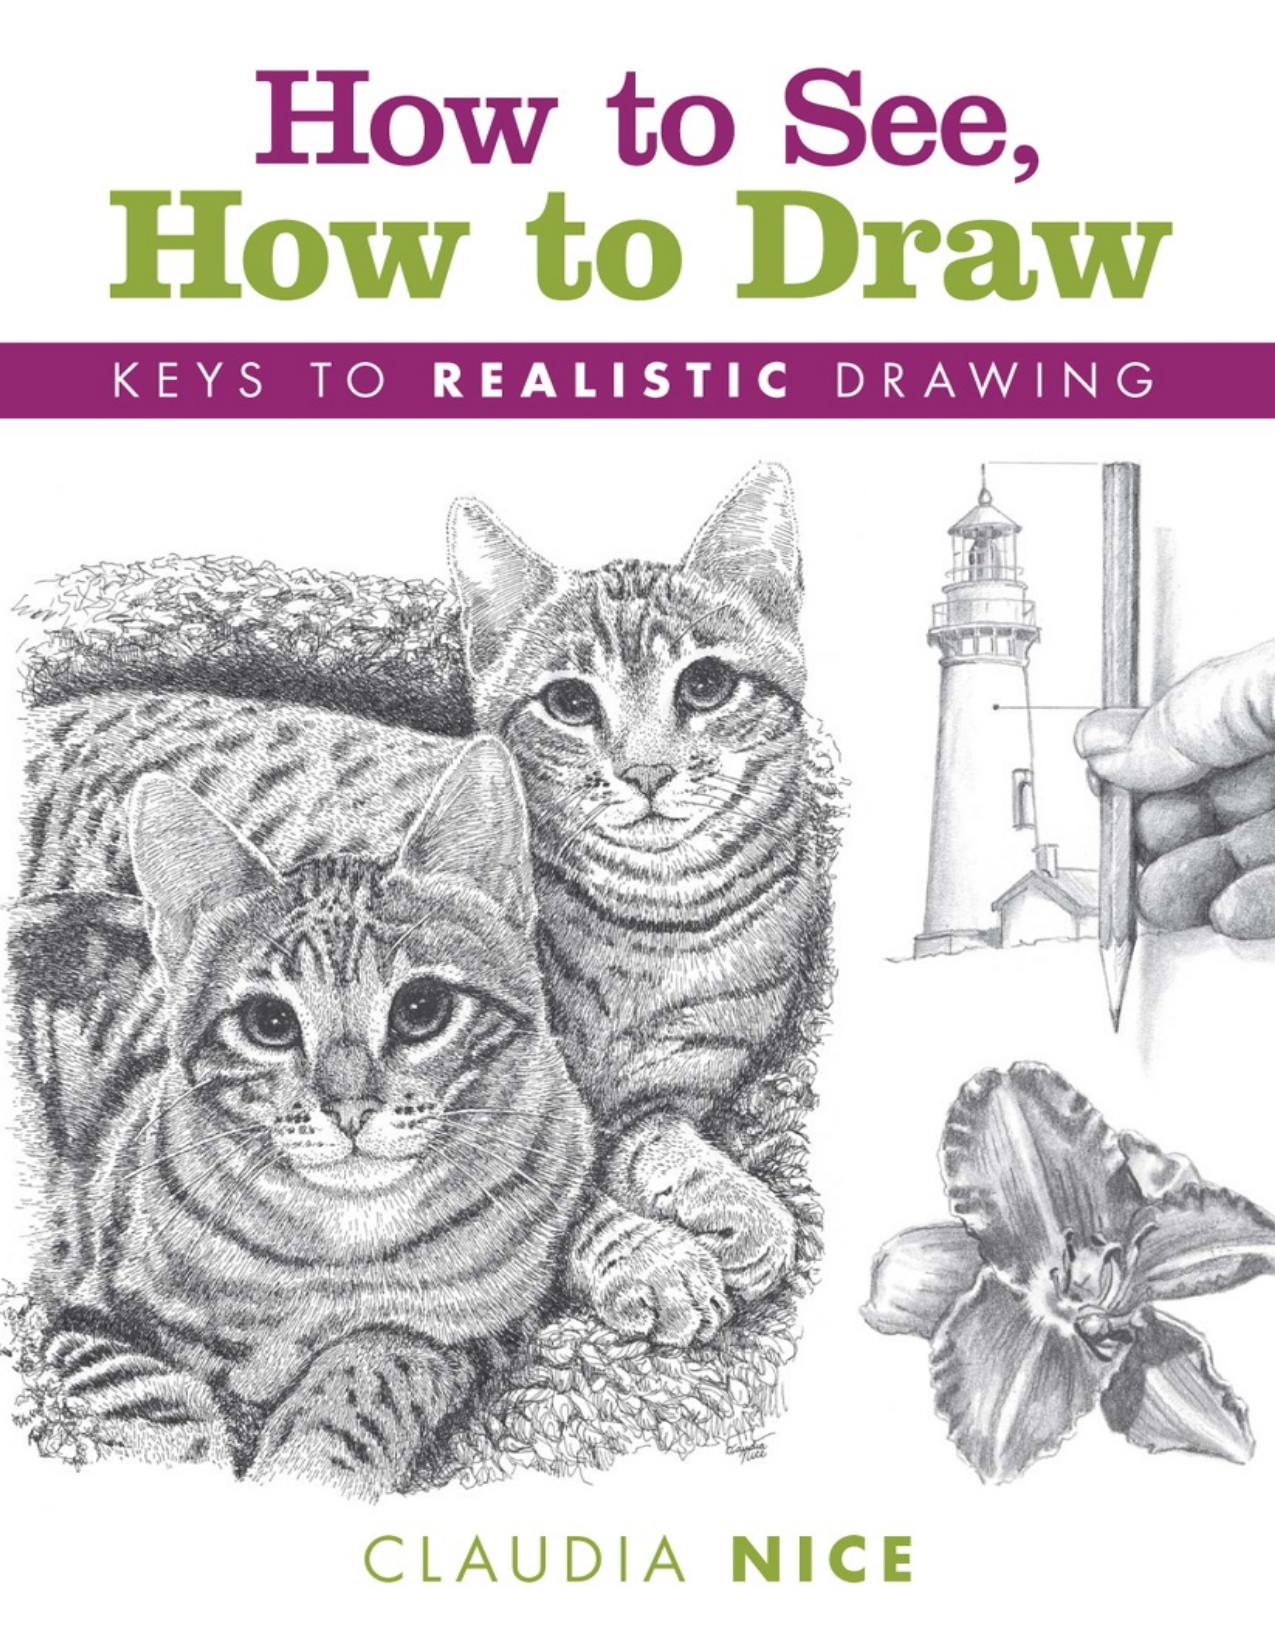 How to See, How to Draw: Keys to Realistic Drawing - PDFDrive.com